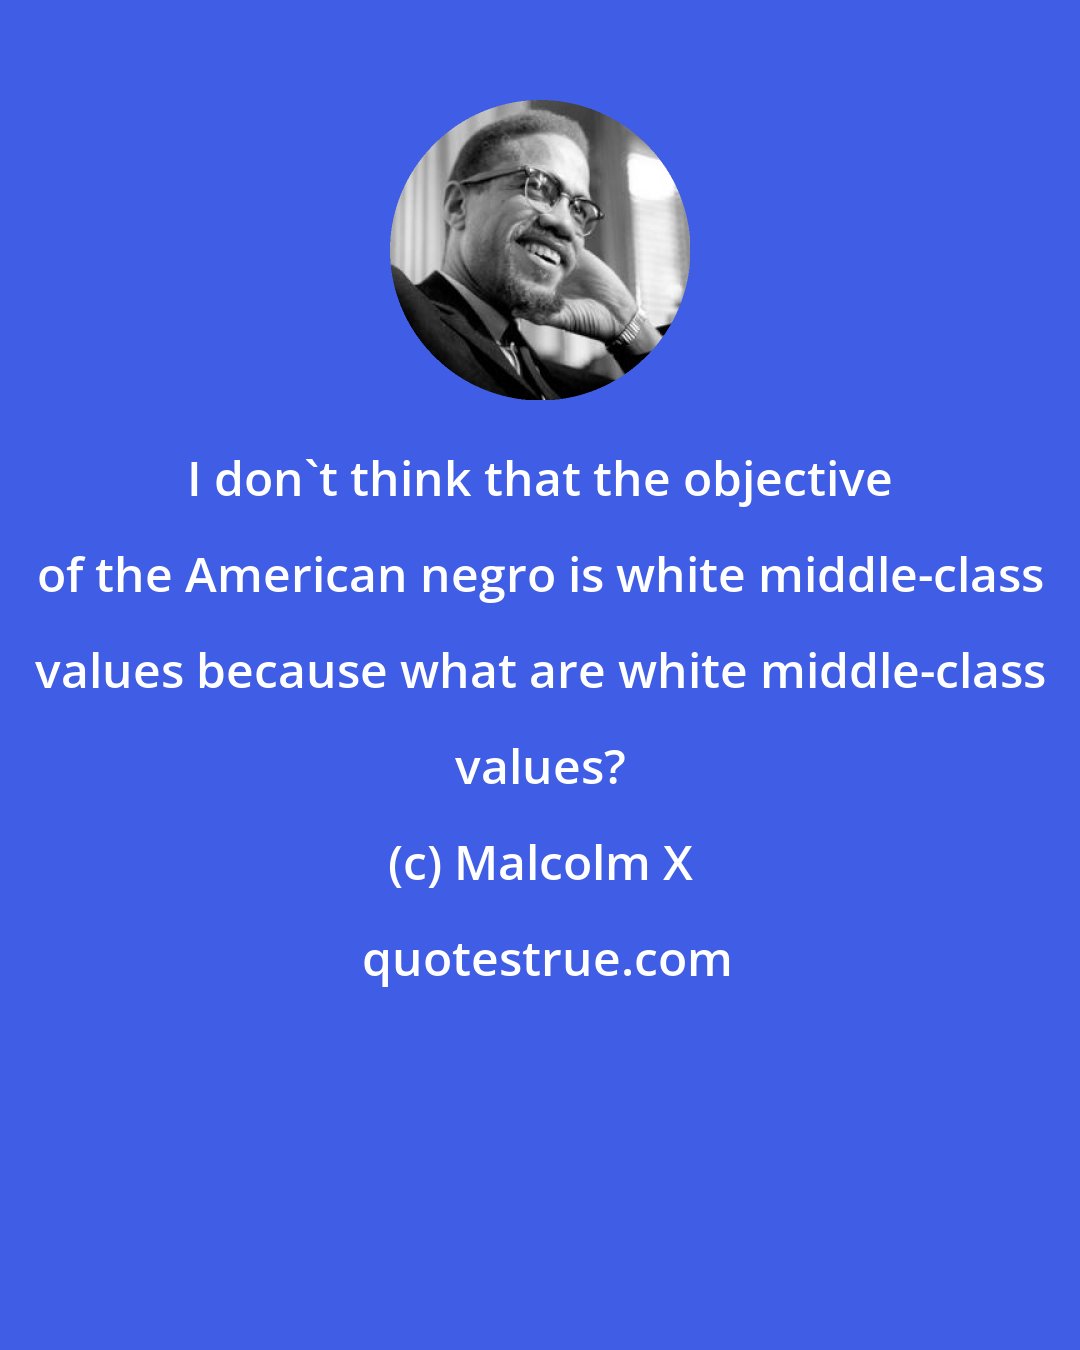 Malcolm X: I don't think that the objective of the American negro is white middle-class values because what are white middle-class values?